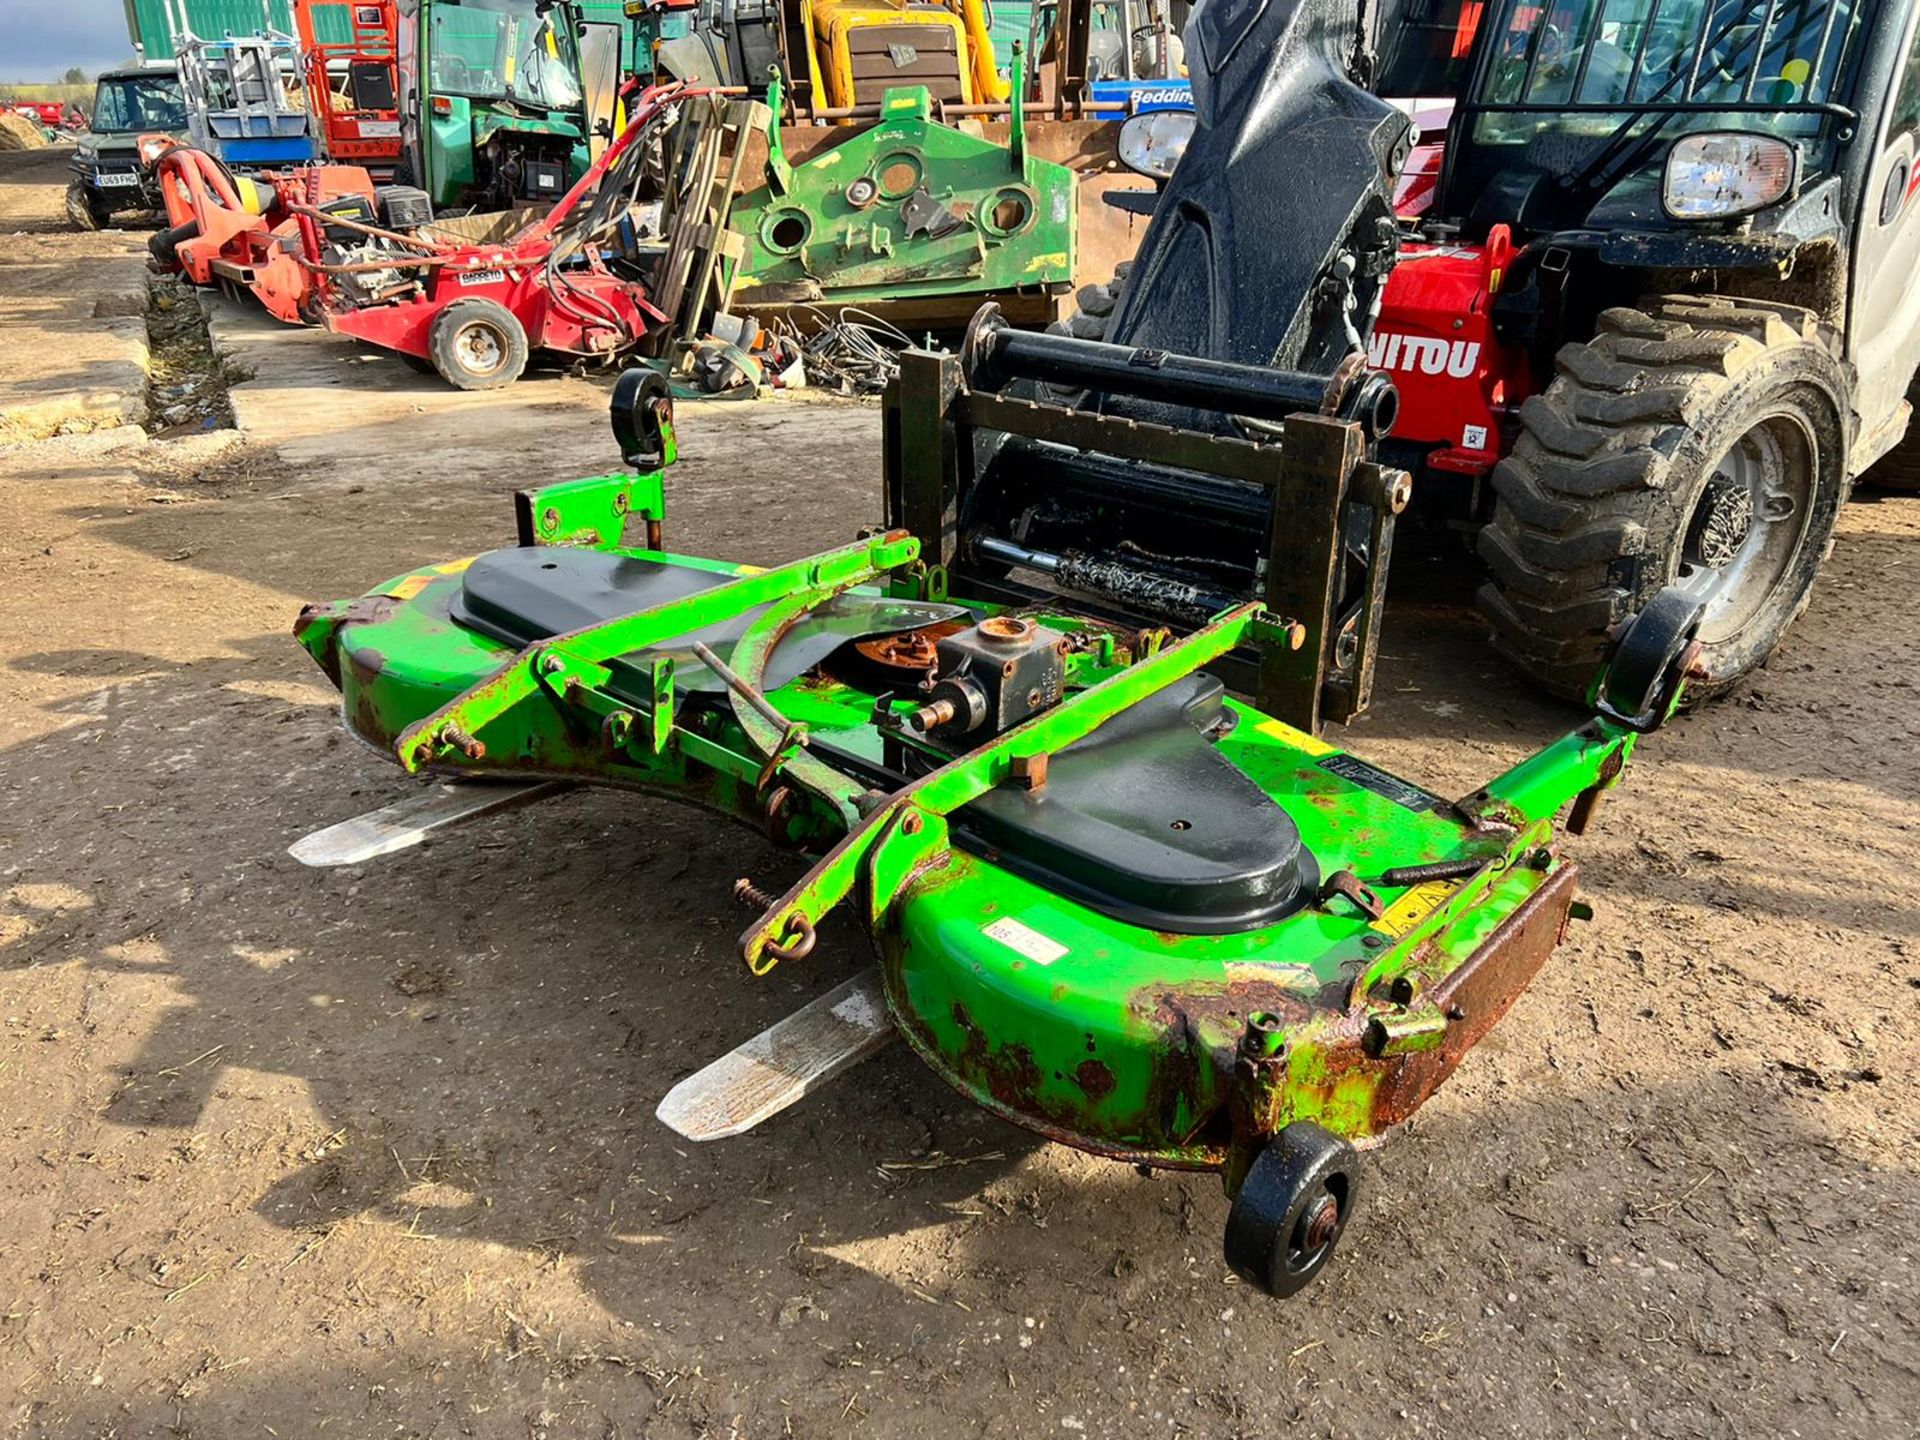 2010 JOHN DEERE 72" MID MOUNTED TRACTOR ROTARY DECK, GOOD SOLID TRIPLE BLADED BECK, WEIGHT 199kg - Image 2 of 12